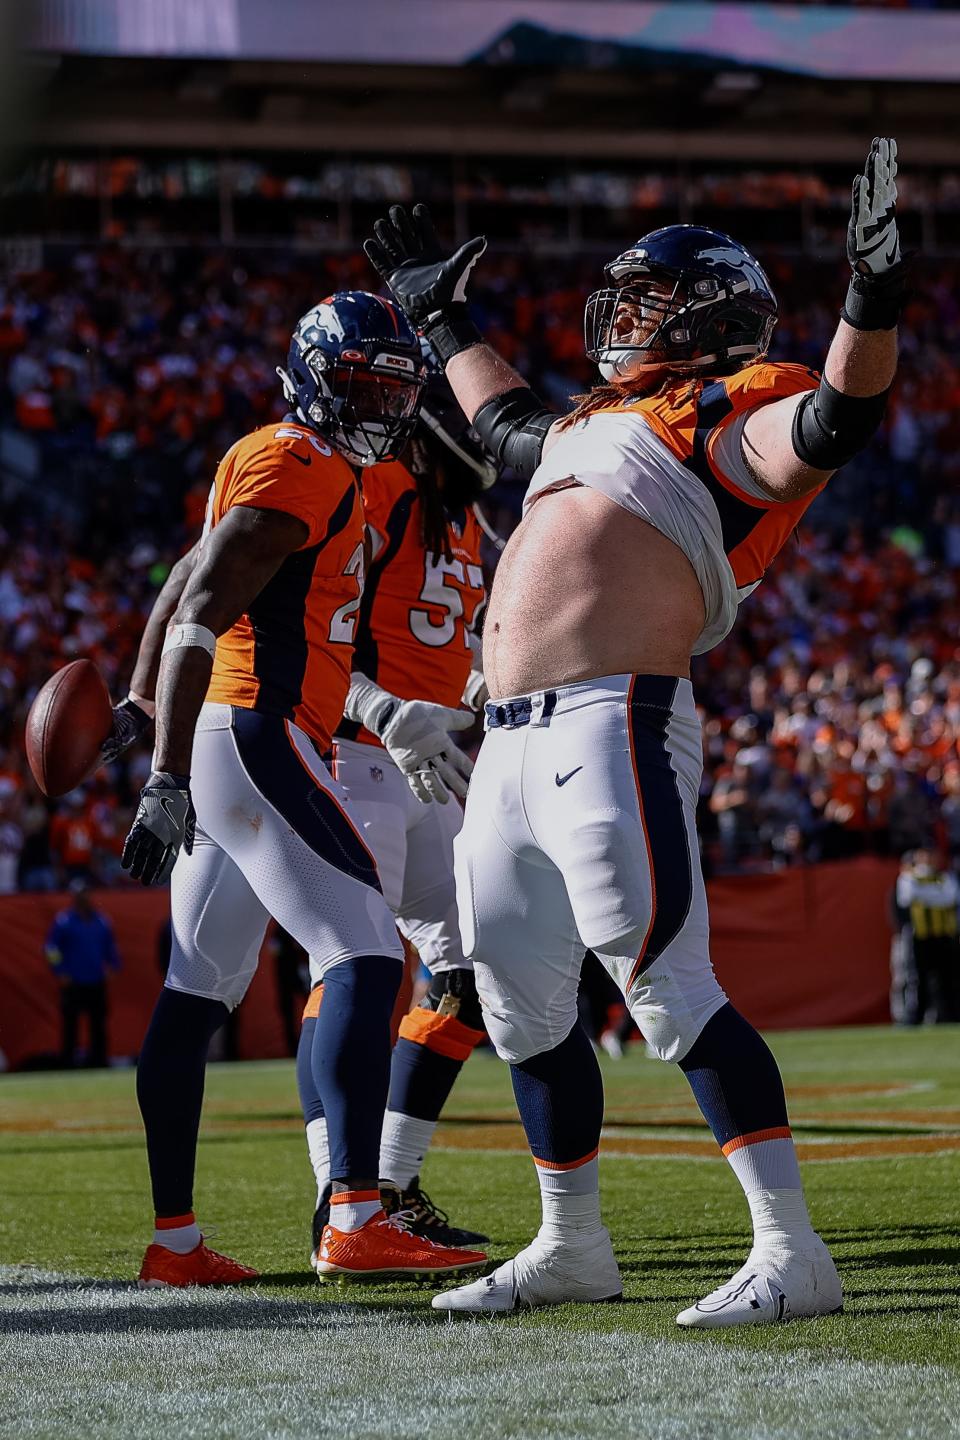 Quinn Meinerz and the Denver Broncos are underdogs against the Jacksonville Jaguars in NFL Week 8.